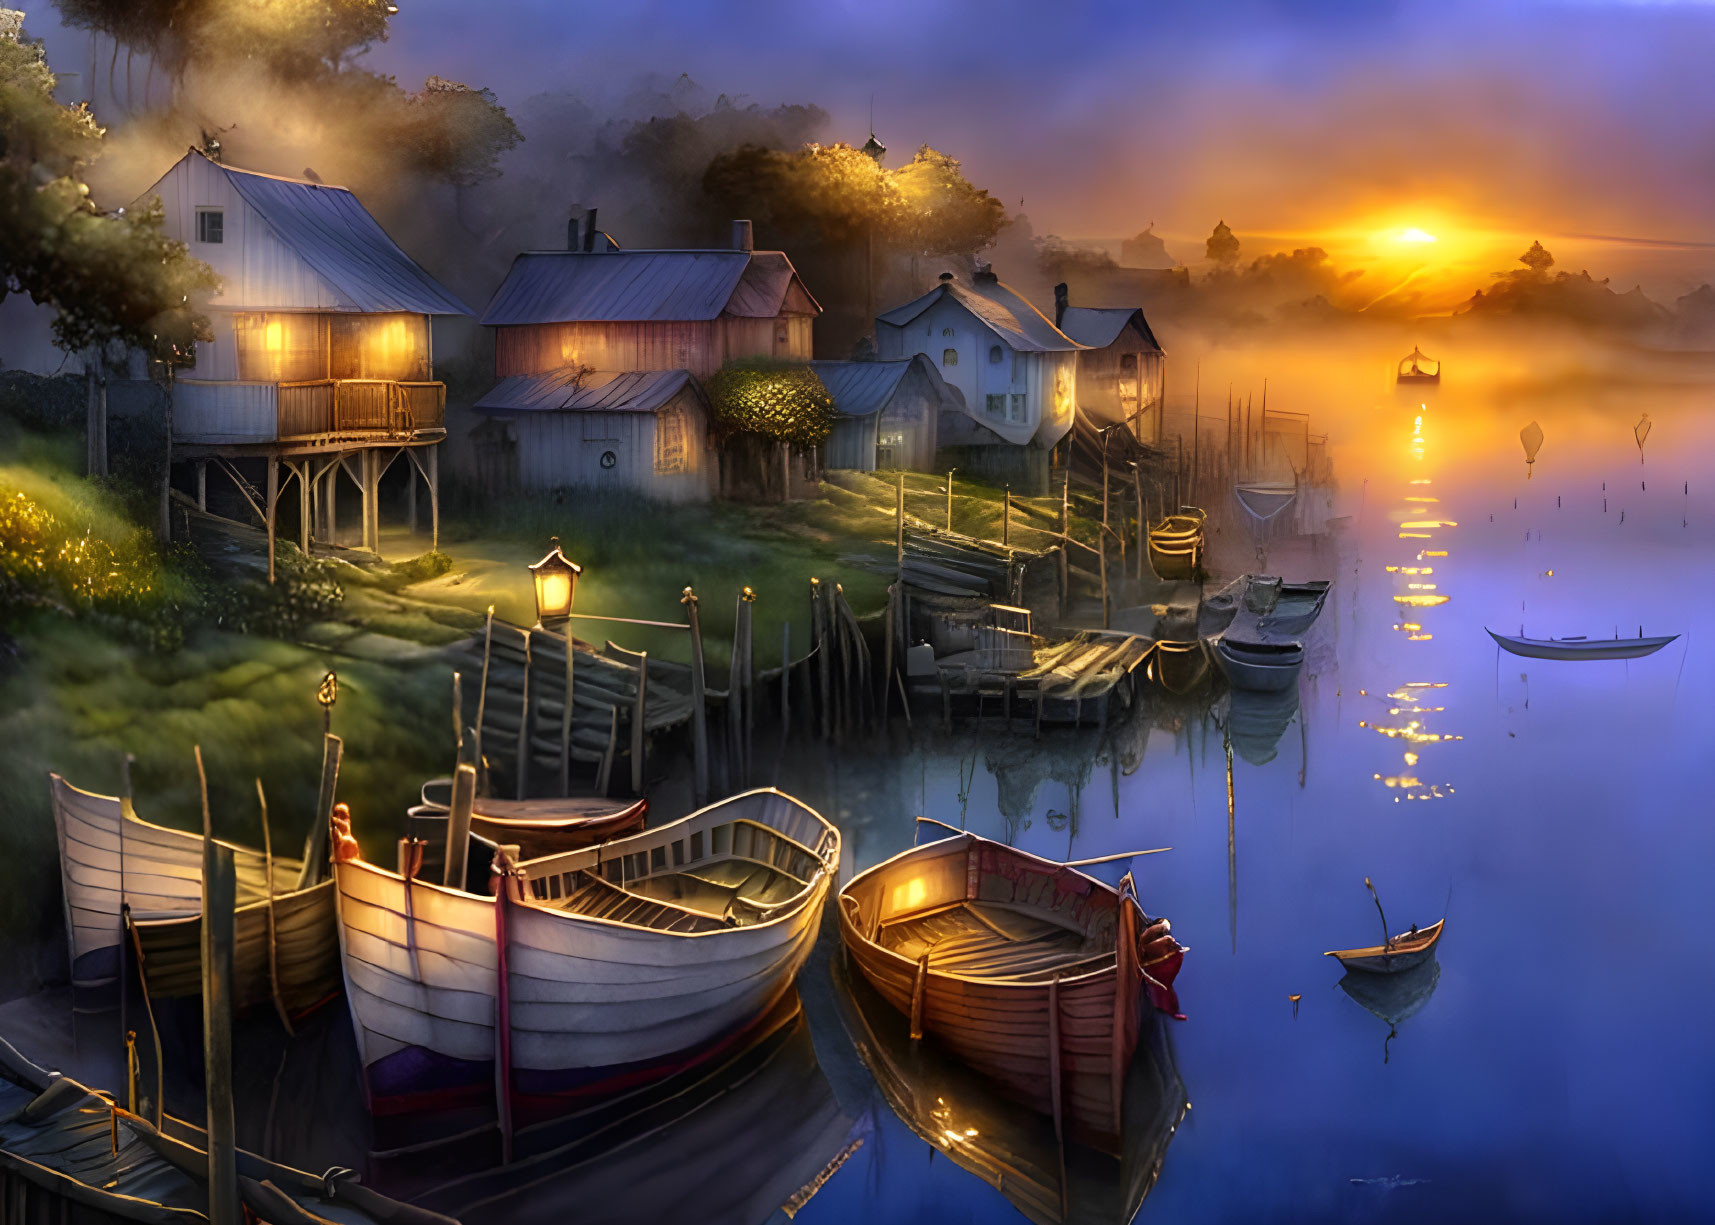 Serene lakeside sunrise with boats, mist, and cozy houses